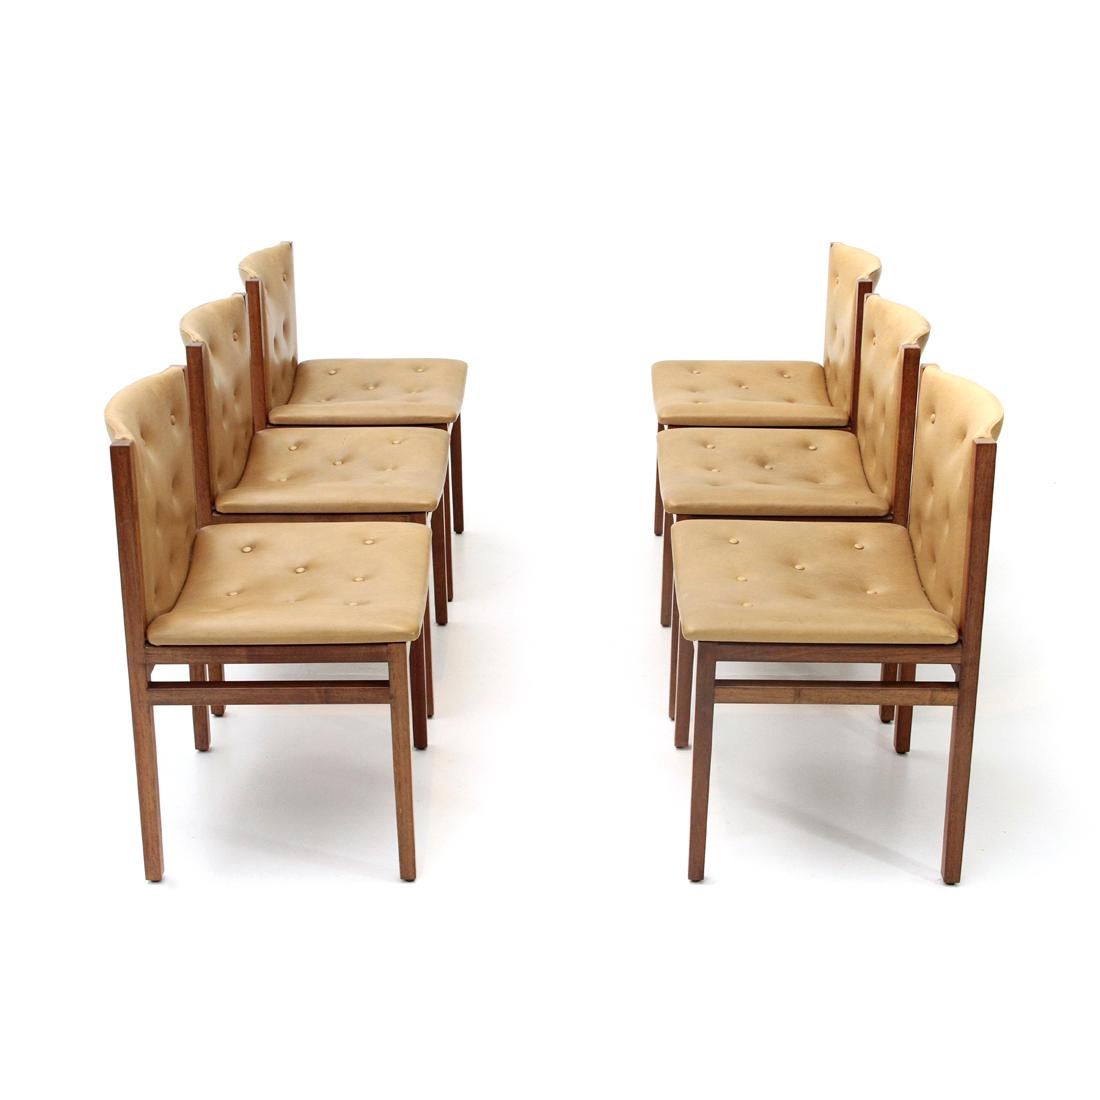 Added Dining Chairs by Tito Agnoli for La Linea, 1960s, Set of Six (Mitte des 20. Jahrhunderts)